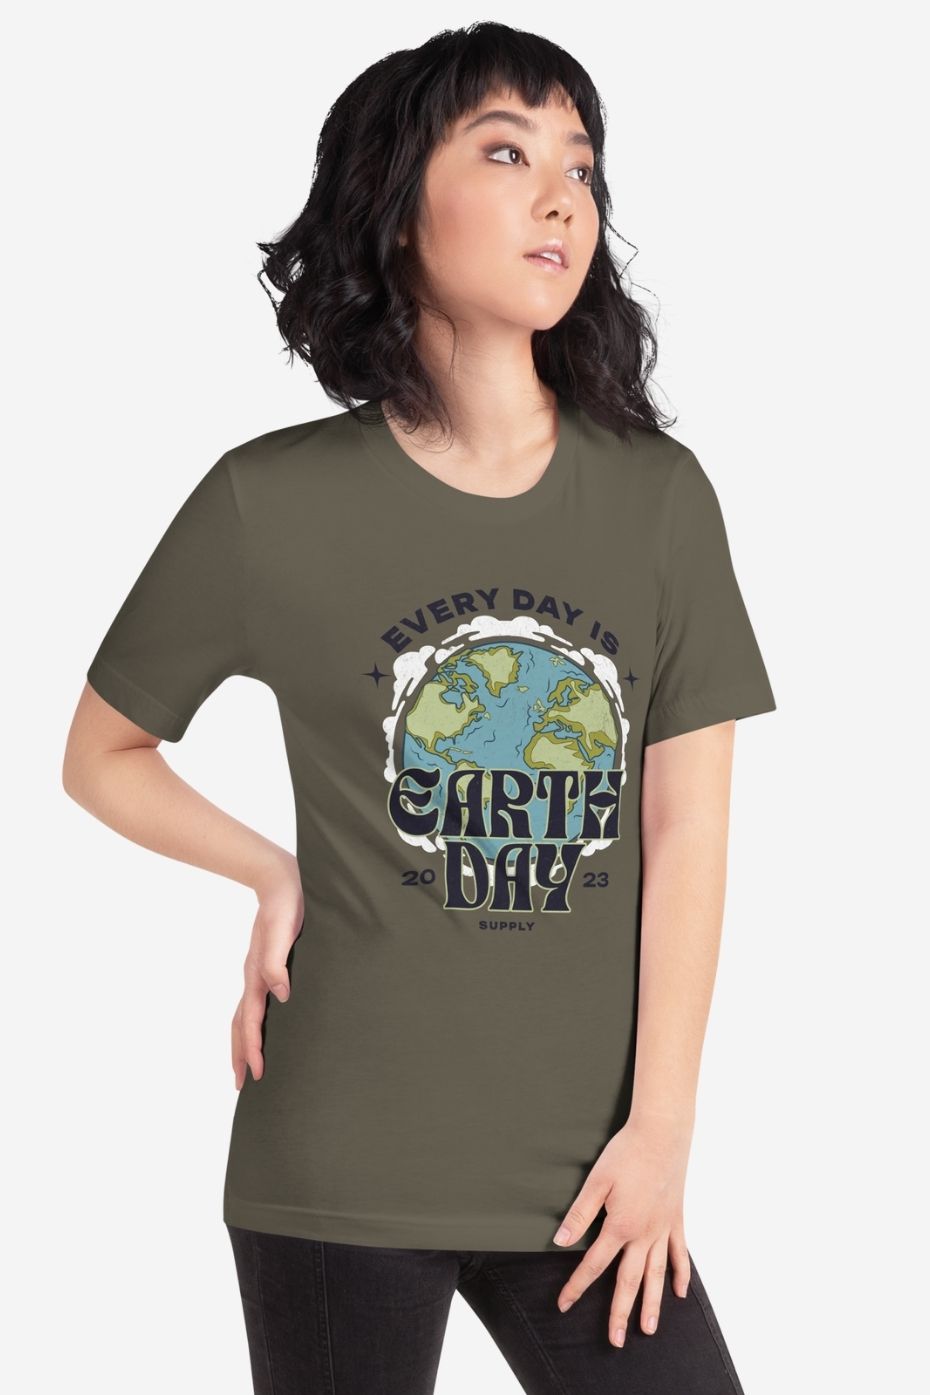 Every day is Earth Day - Unisex t-shirt